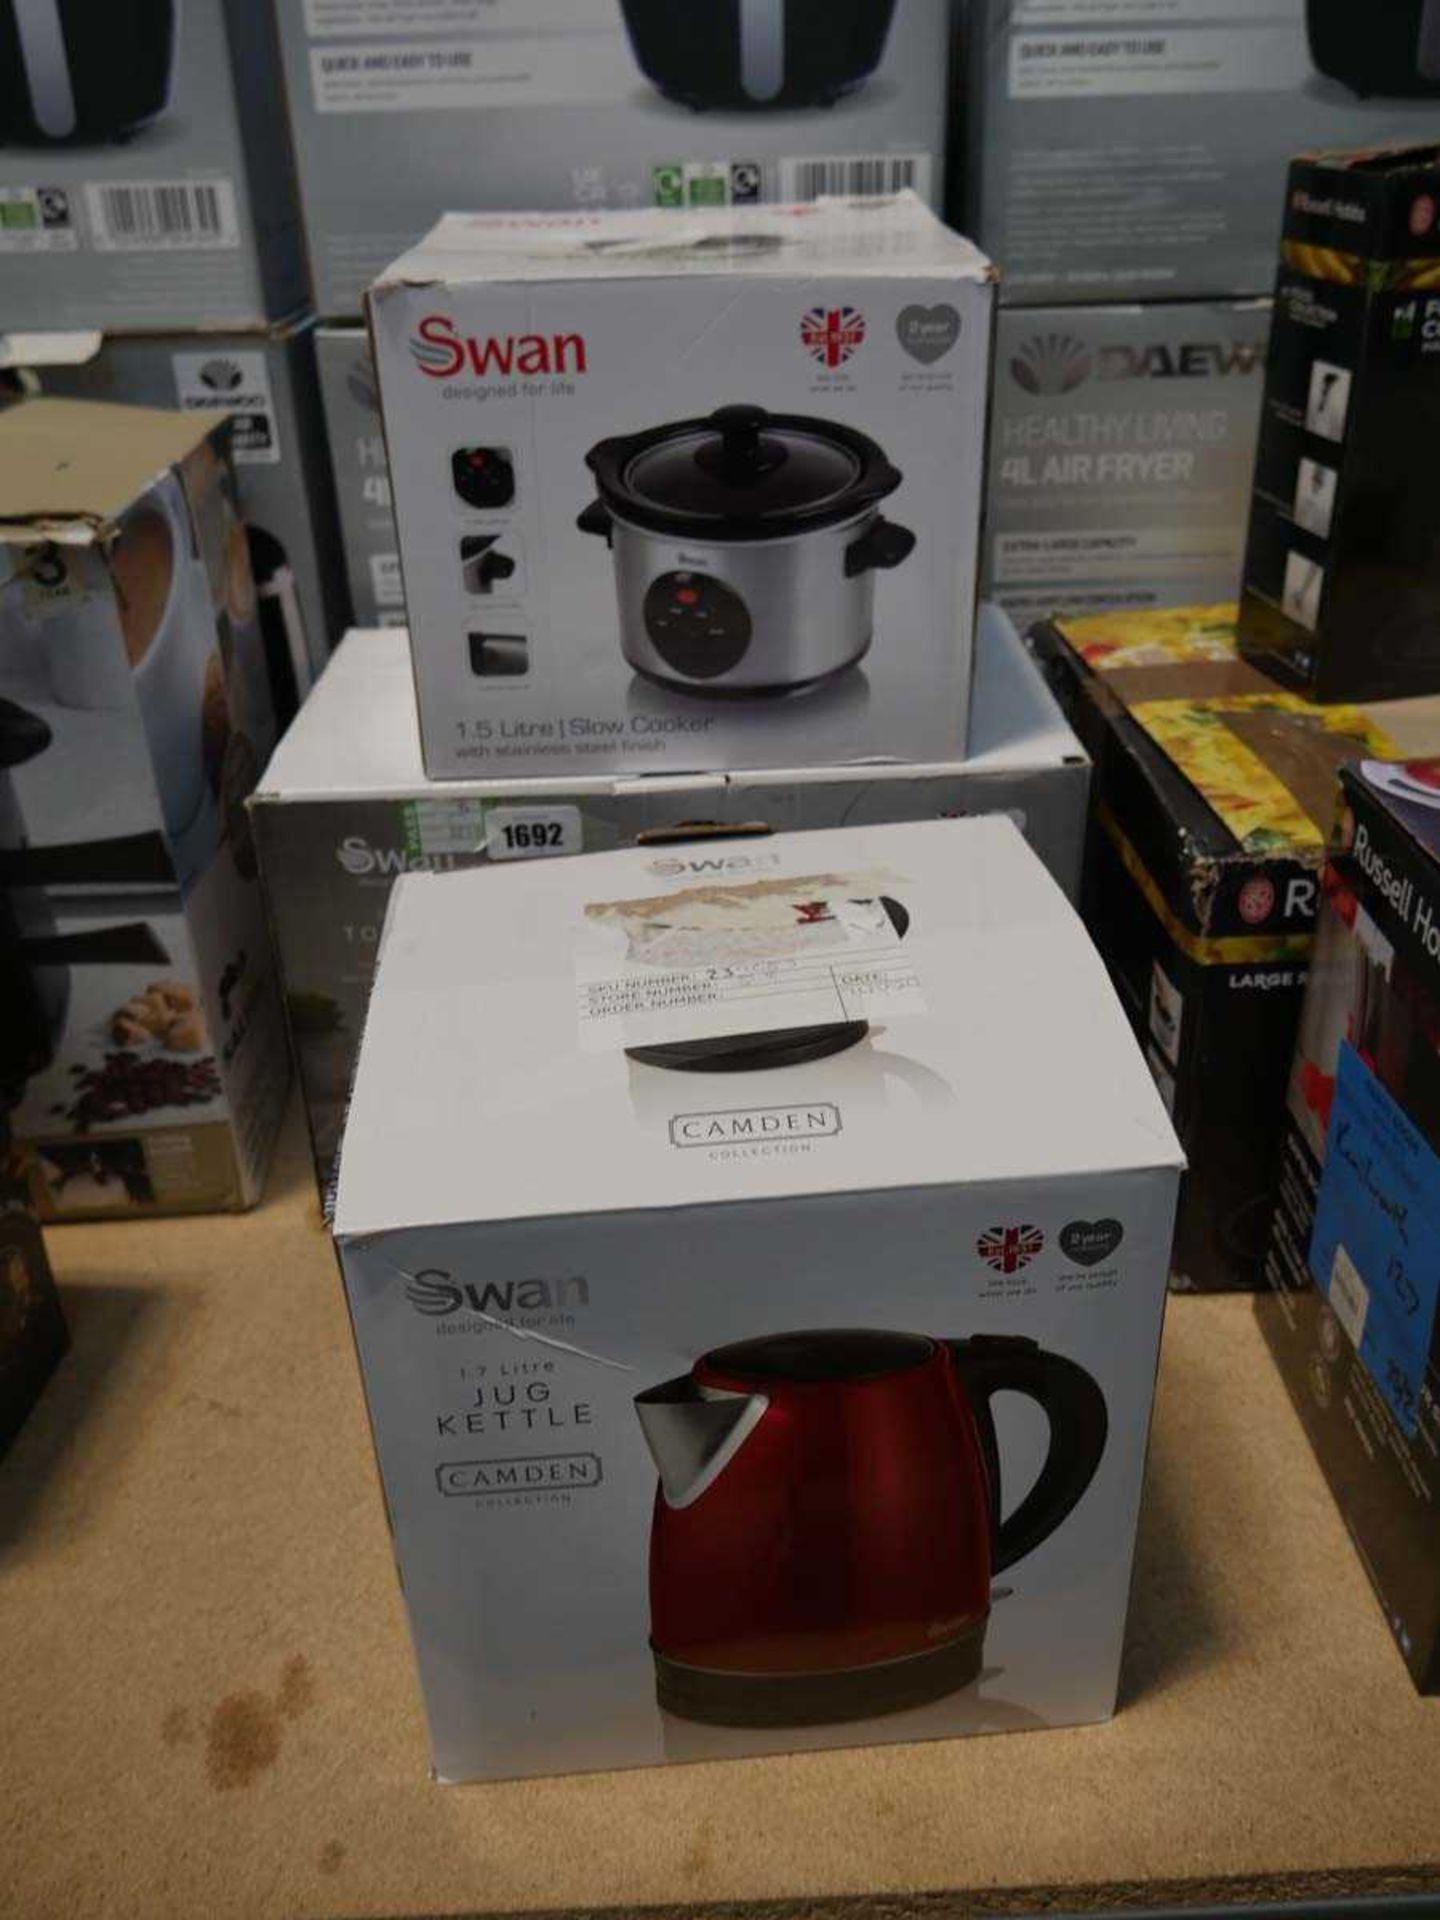 Swan 1.7L jug kettle together with a Swan 2 slice toaster and a Swan 1.5L slow cooker